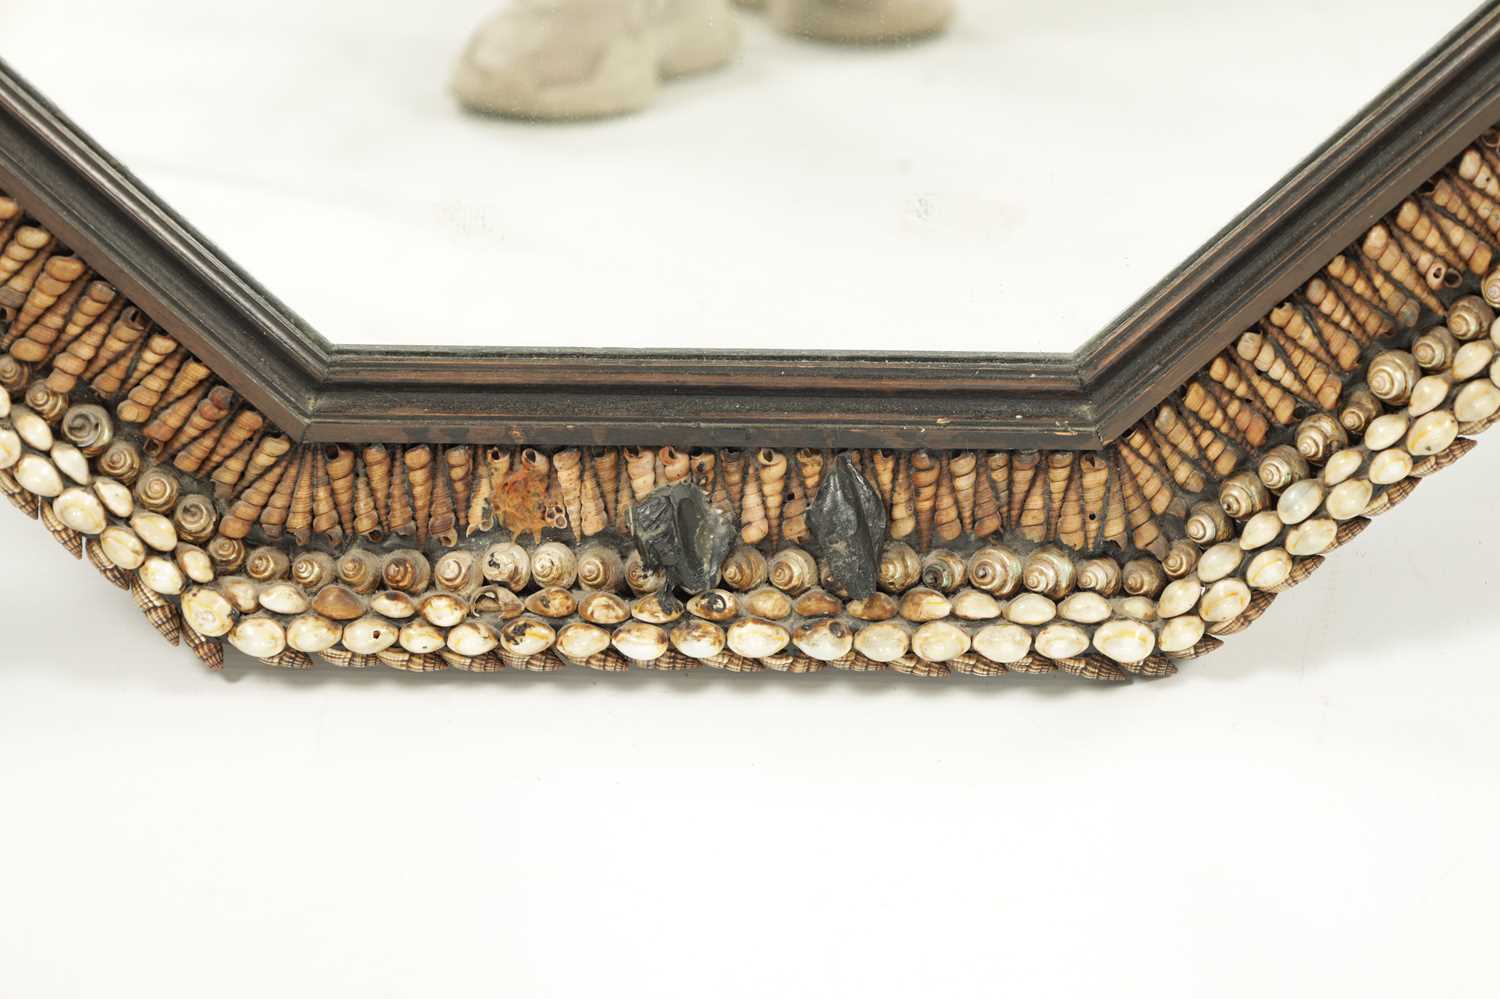 A DECORATIVE SHELLWORK HANGING MIRROR - Image 4 of 7